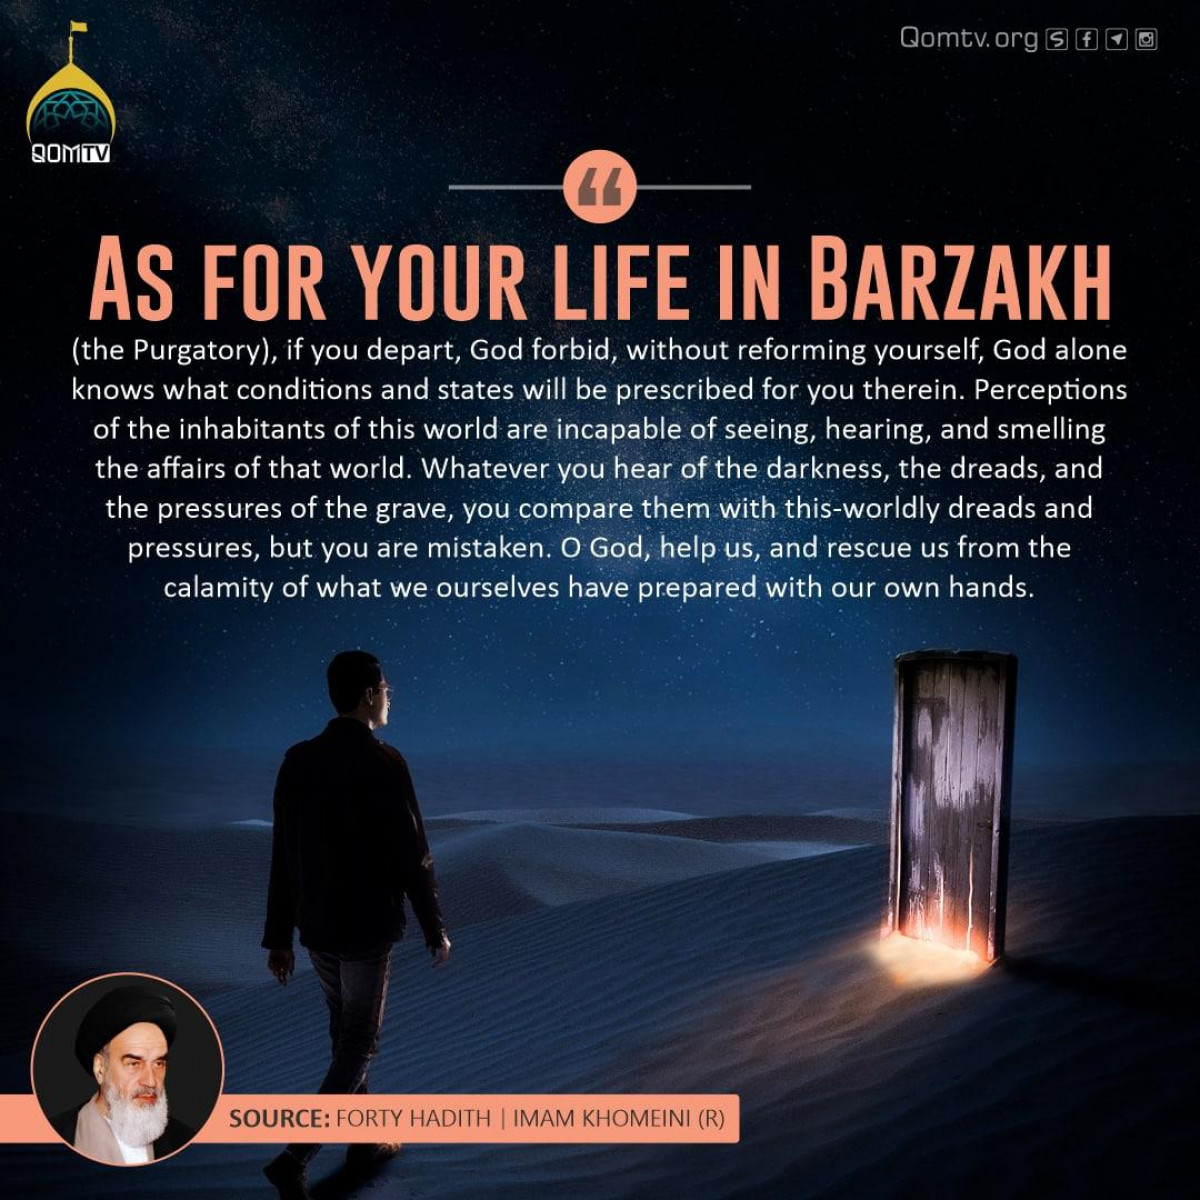 As for your life in Barzakh (the Purgatory)